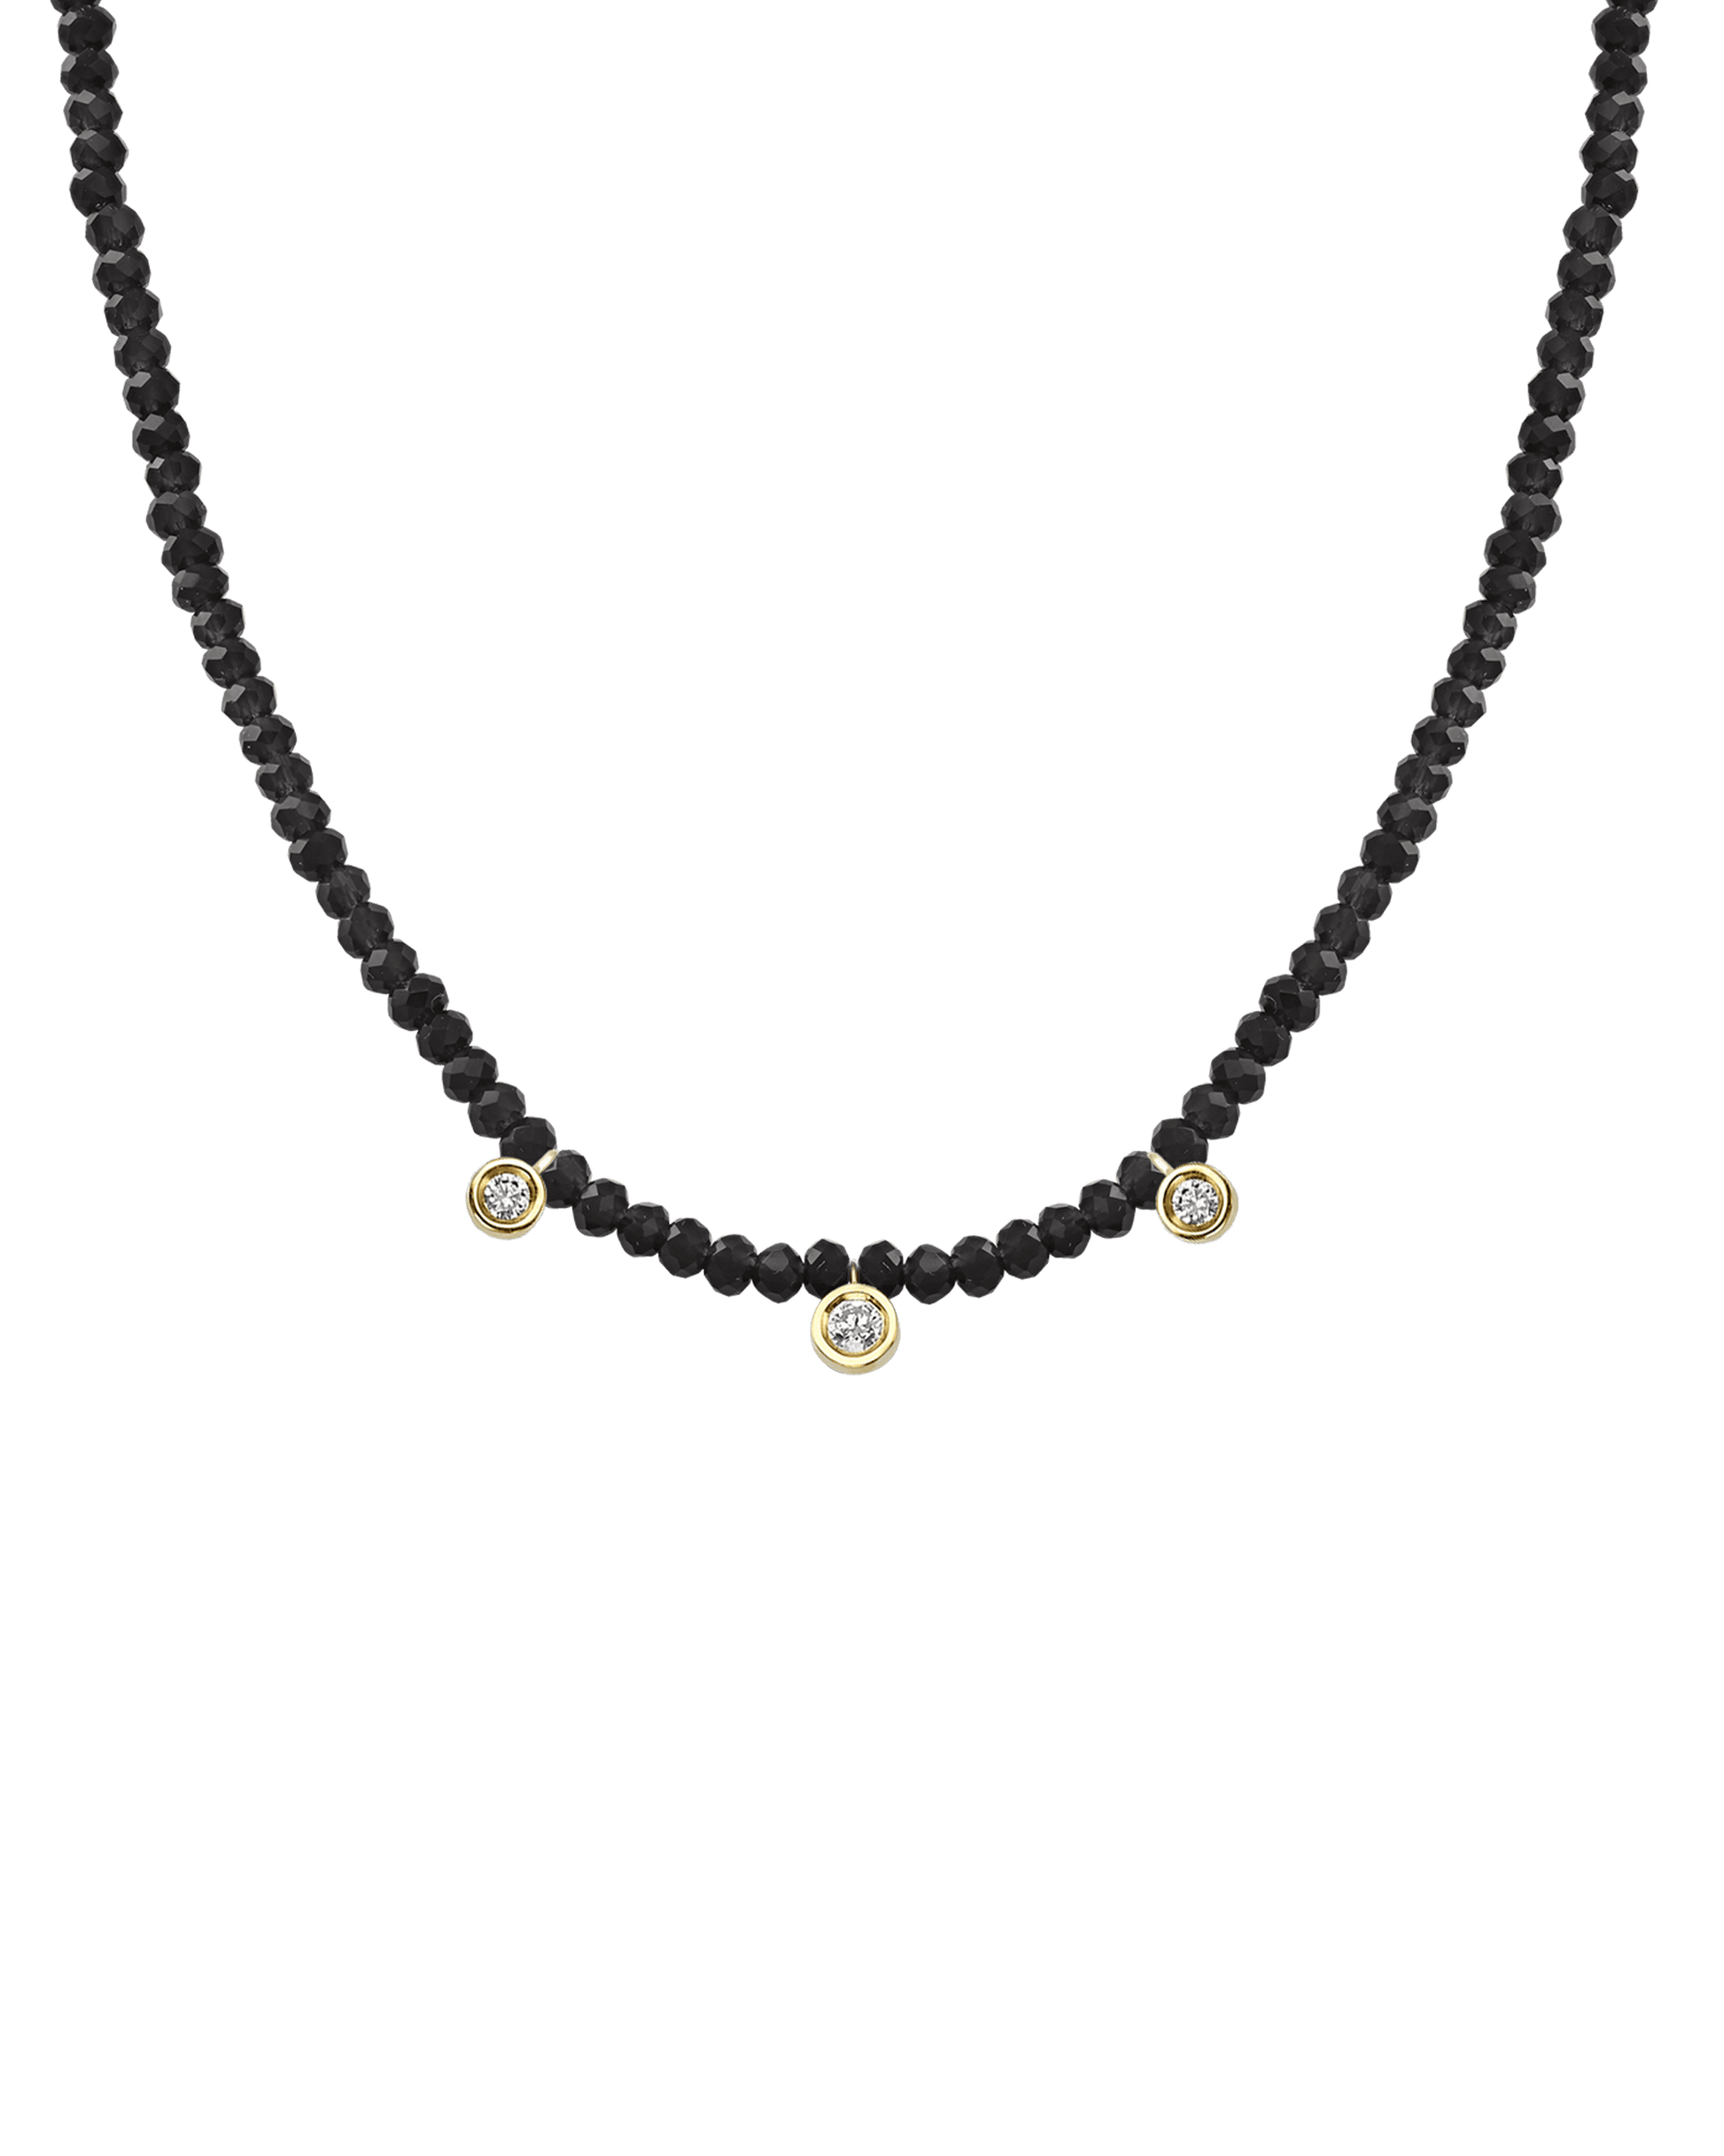 Apatite Gemstone & Three diamonds Necklace - 14K Yellow Gold Necklaces magal-dev Glass Beads Black Spinnel 14" - Collar 